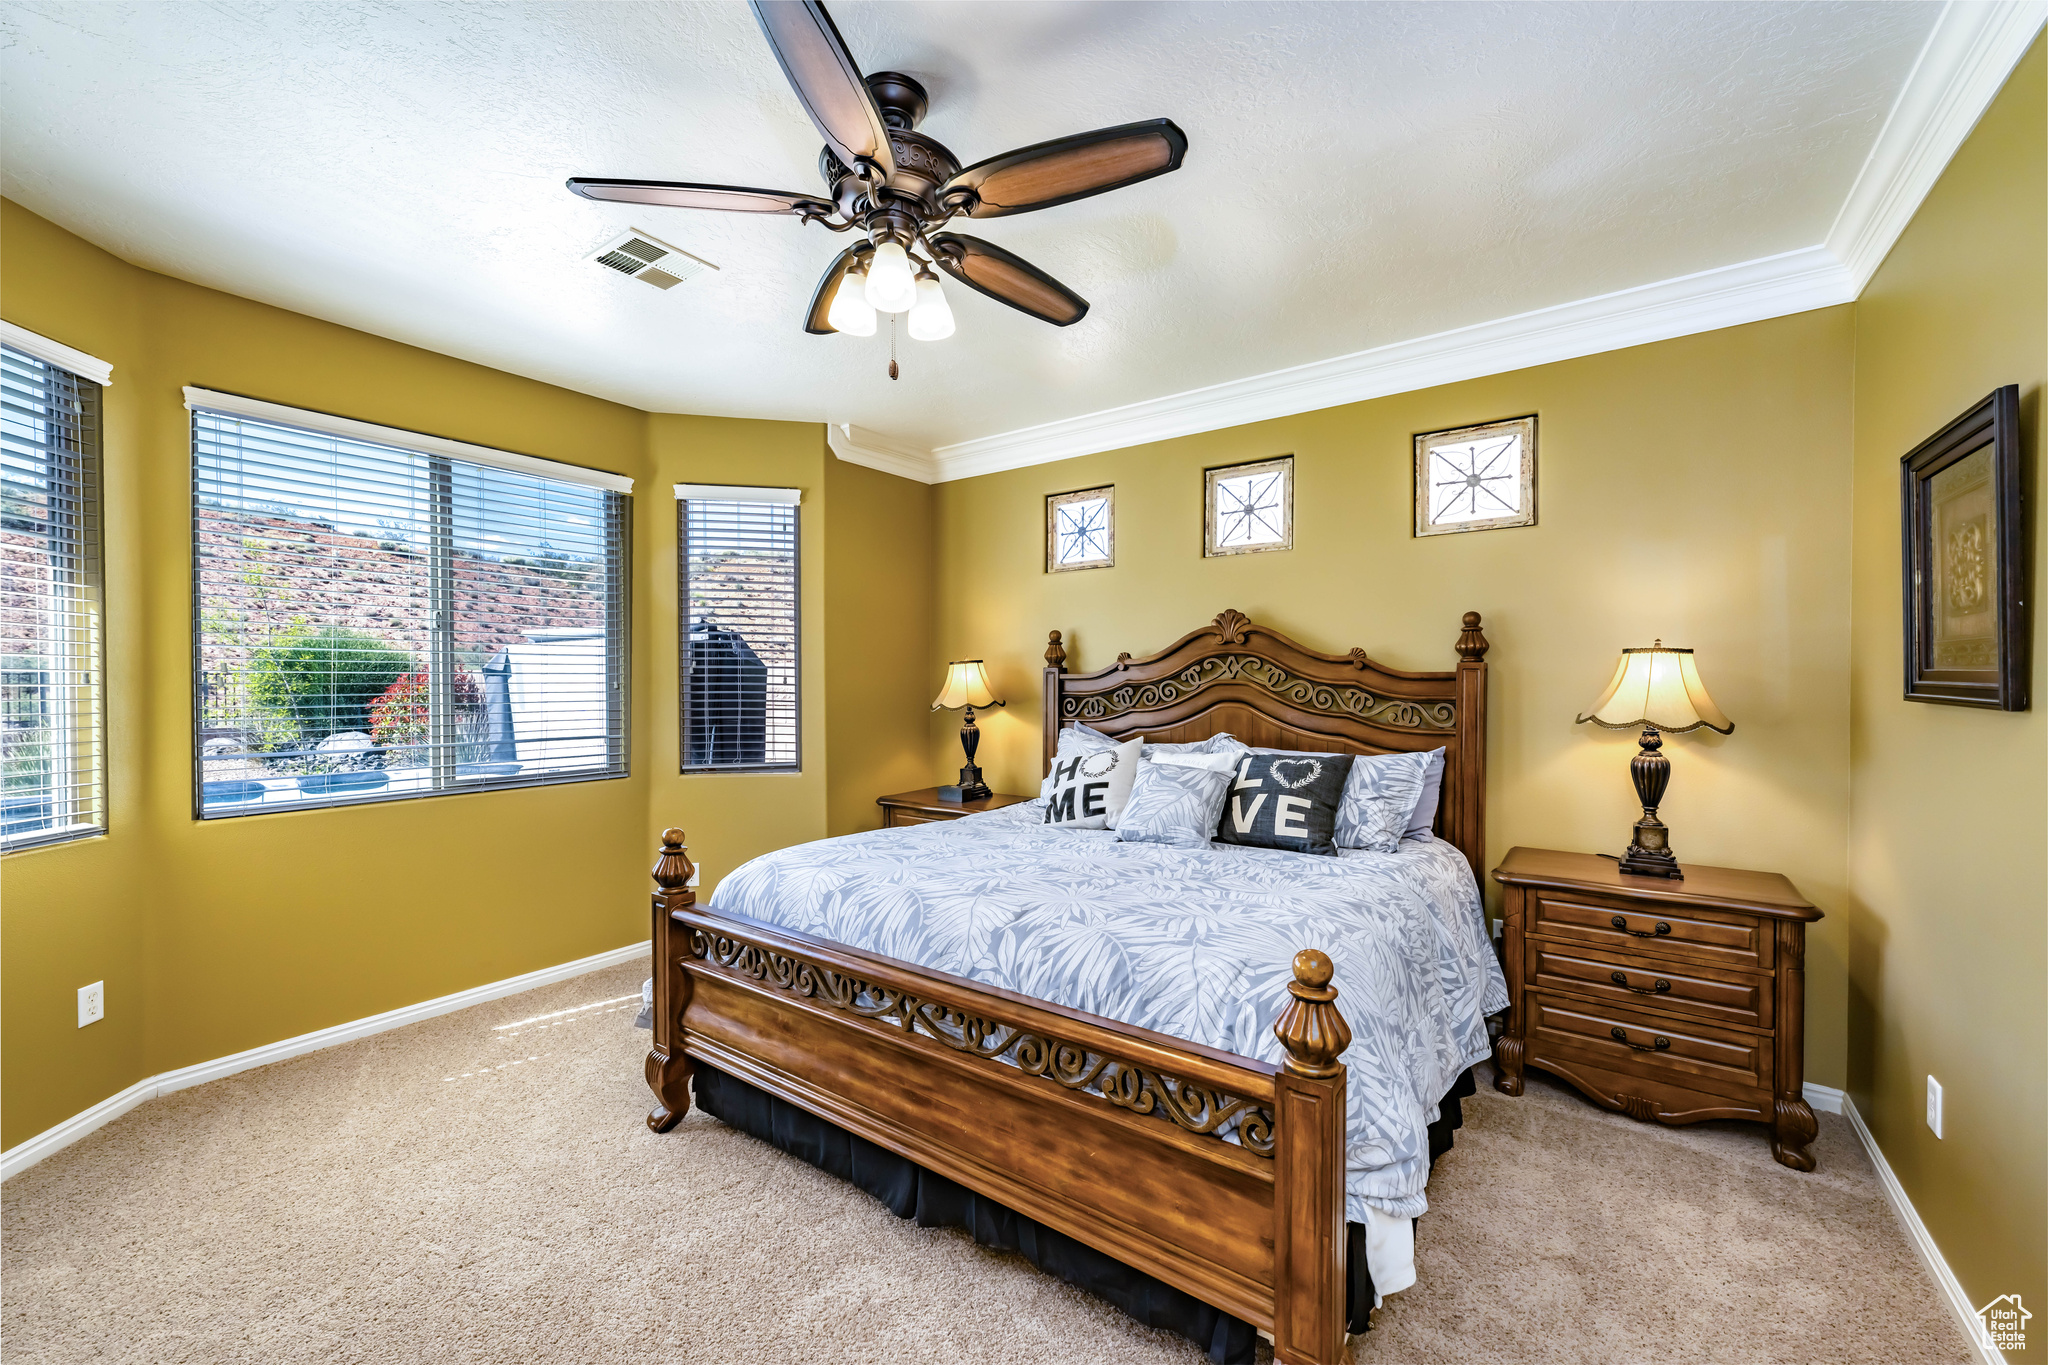 Carpeted primary bedroom with ornamental molding and ceiling fan